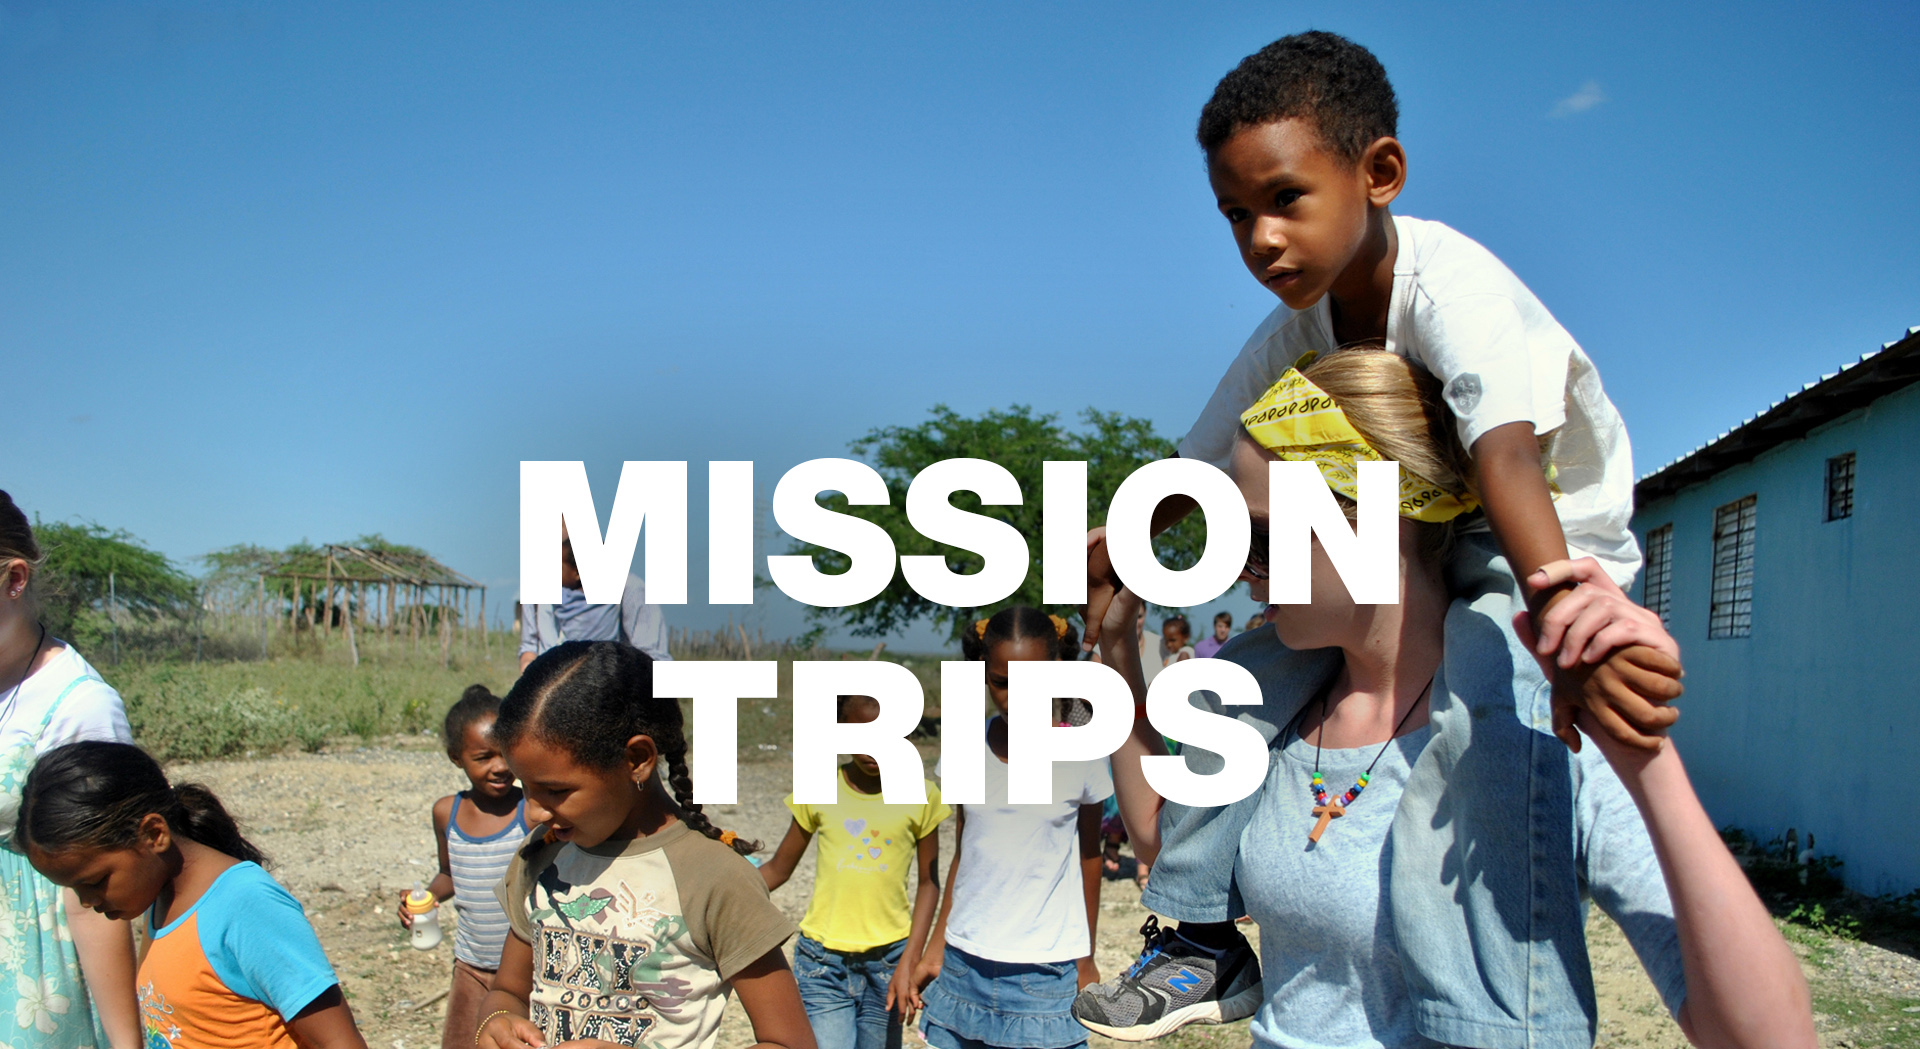 Child being carried during church Mission trip